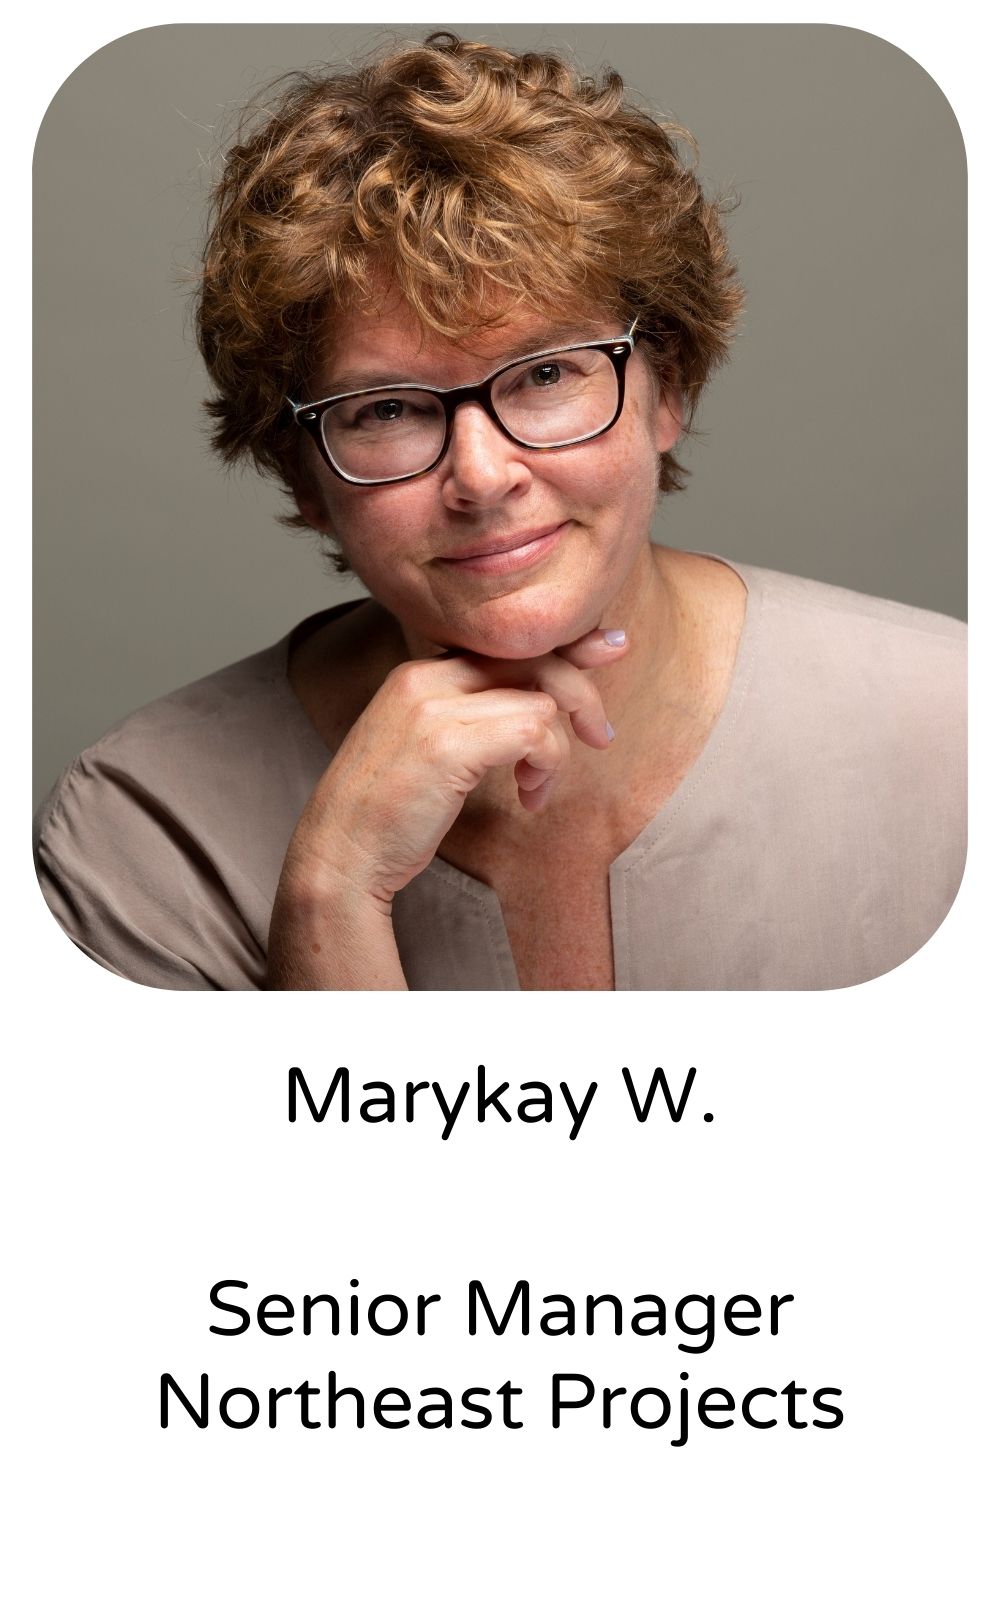 Marykay W, Senior Manager, Northeast Projects